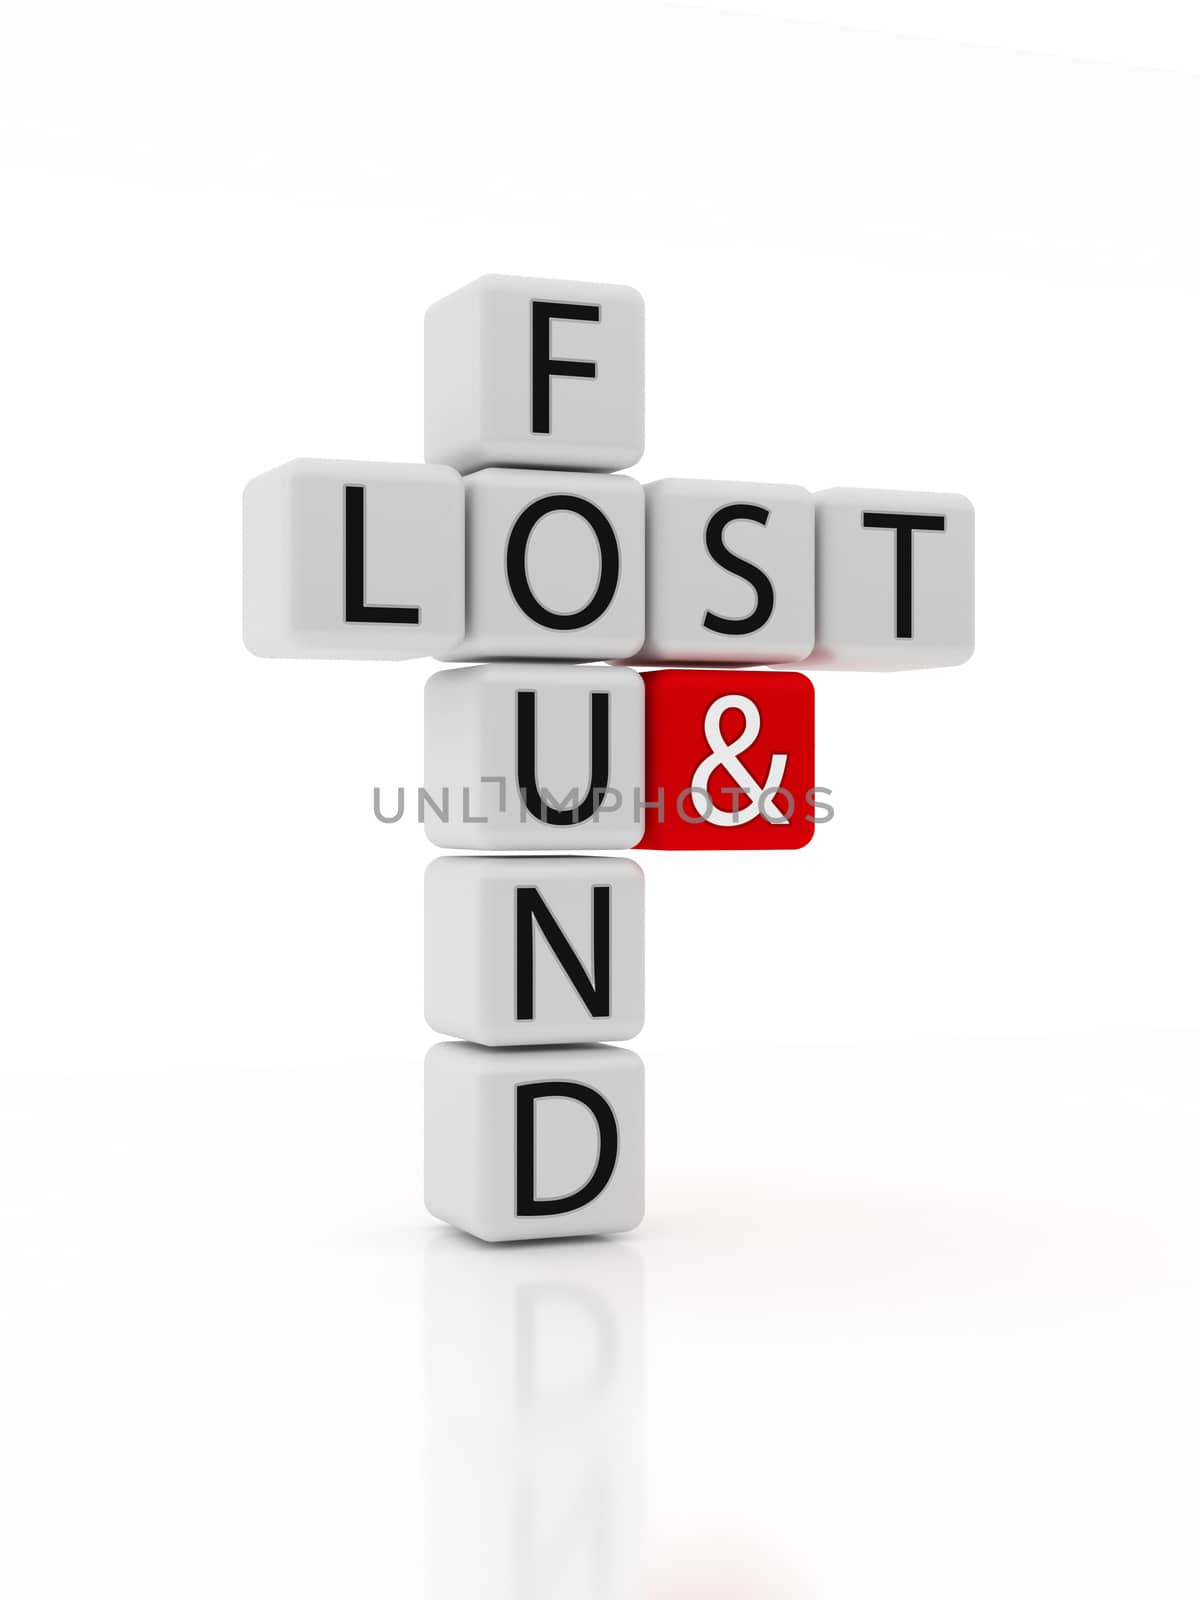 Lost and Found Puzzle - Dice containing the text lost and found crossed. Isolated on a white background.